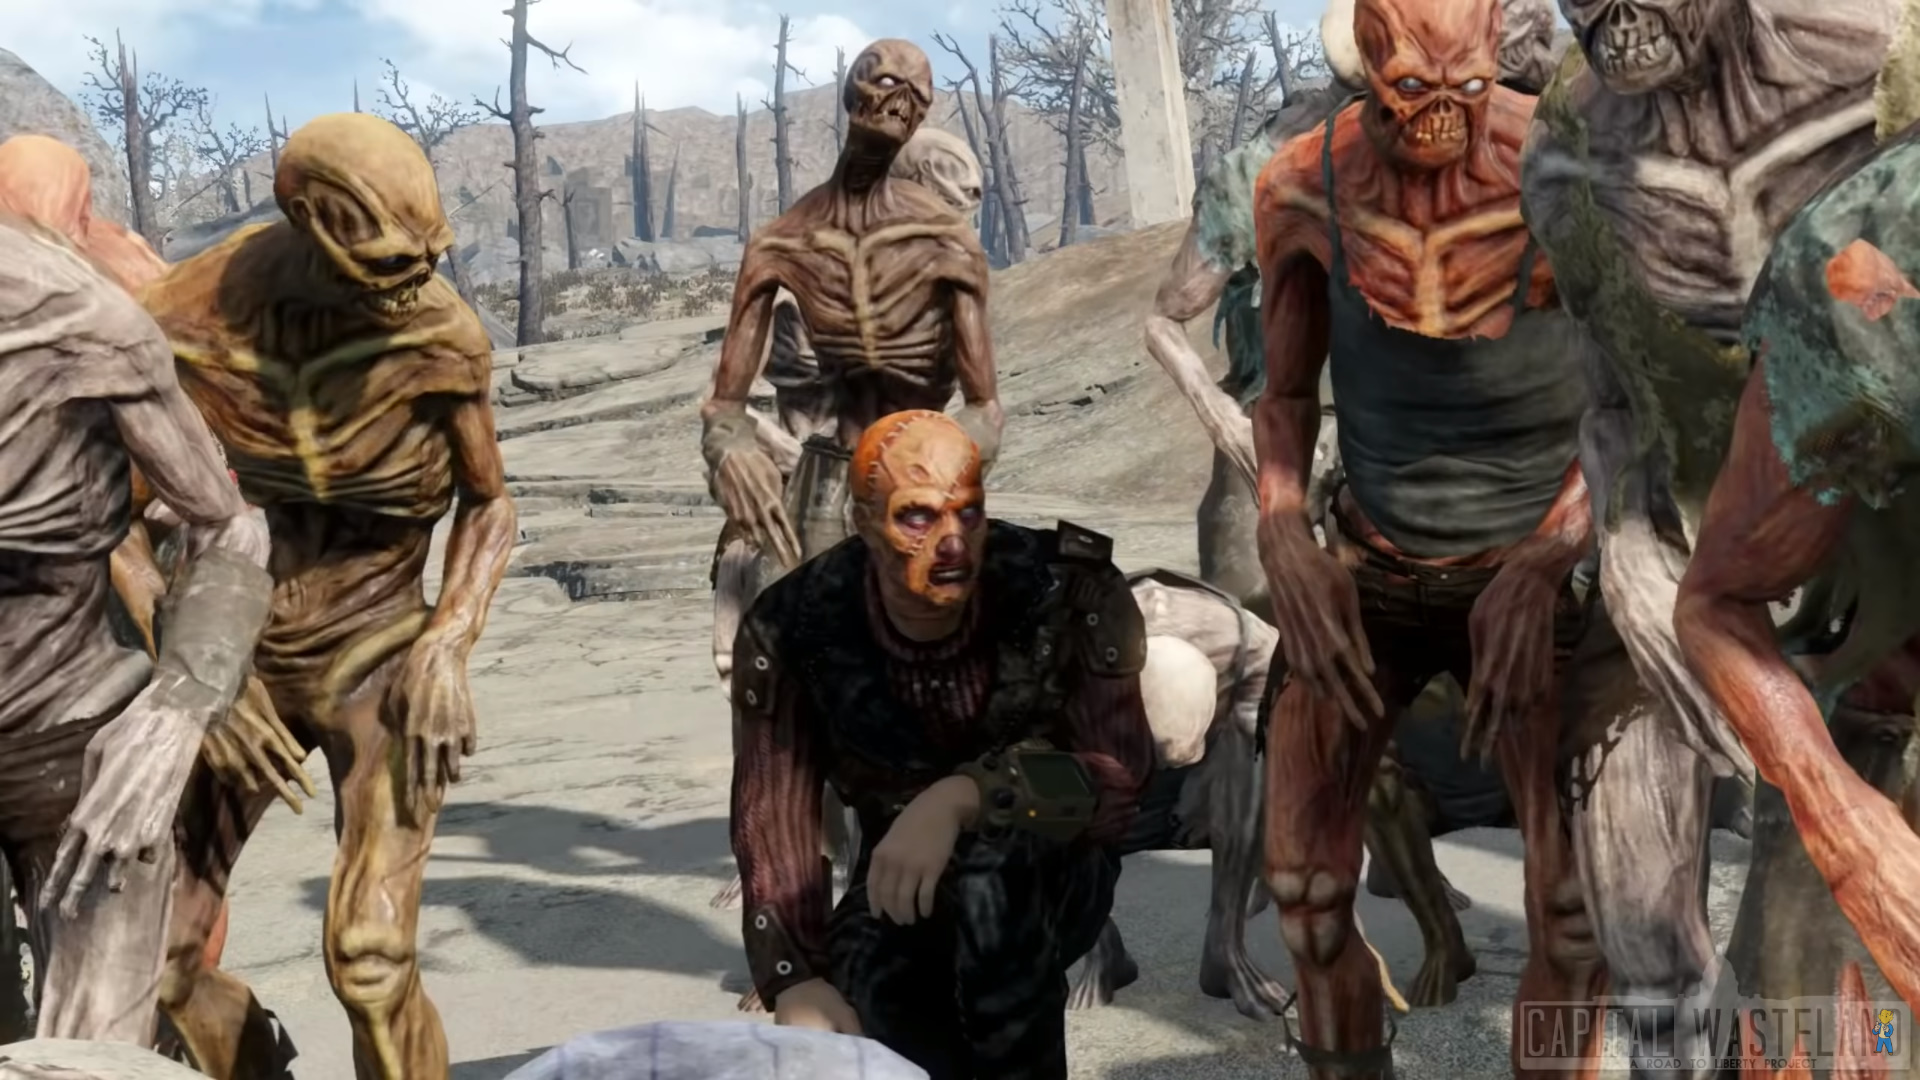 Feral ghouls invade DC in this trailer for the Fallout 4 mod. 